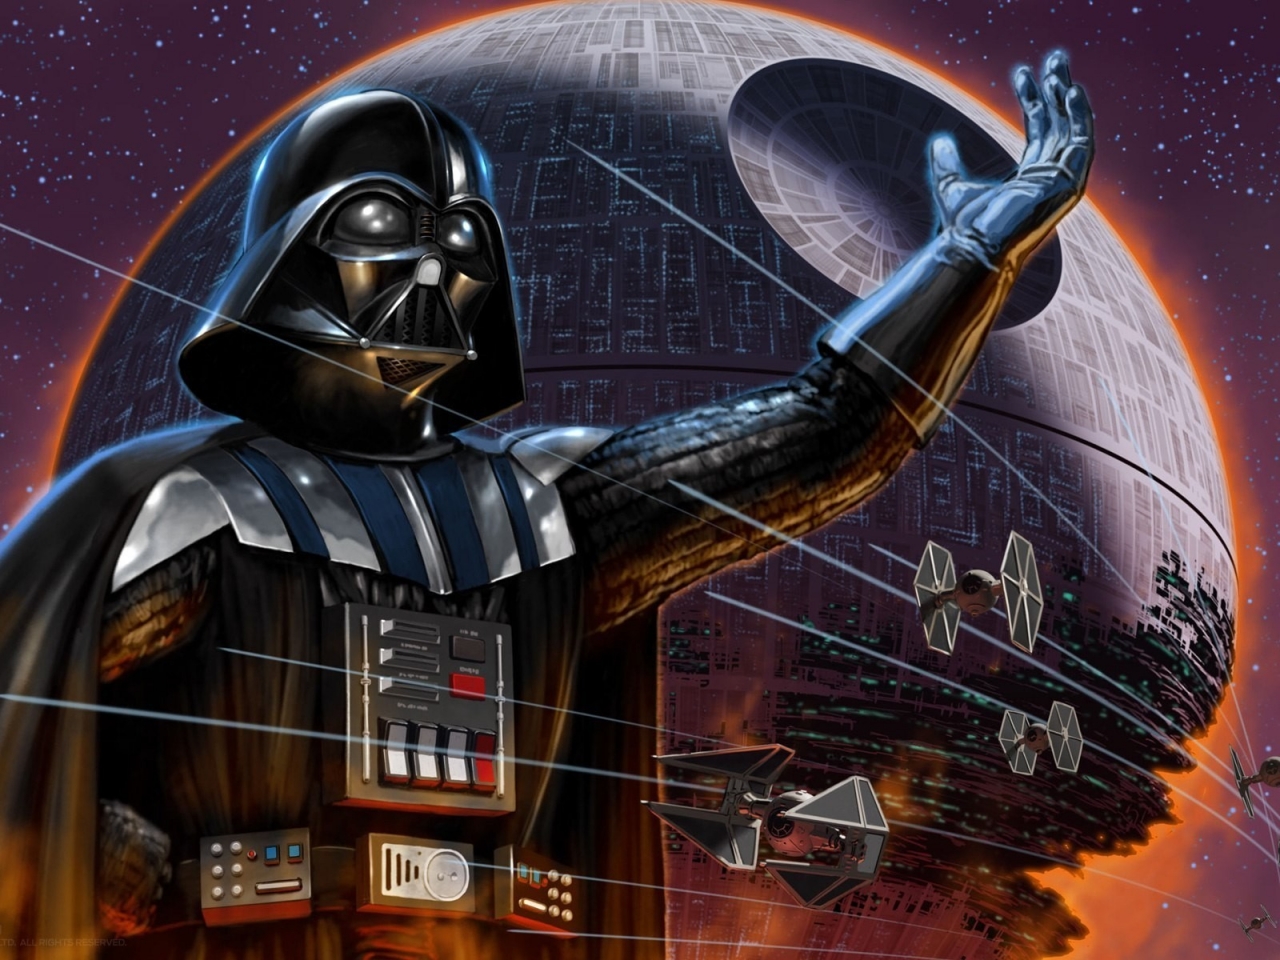 Darth Vader Star Wars Character for 1280 x 960 resolution